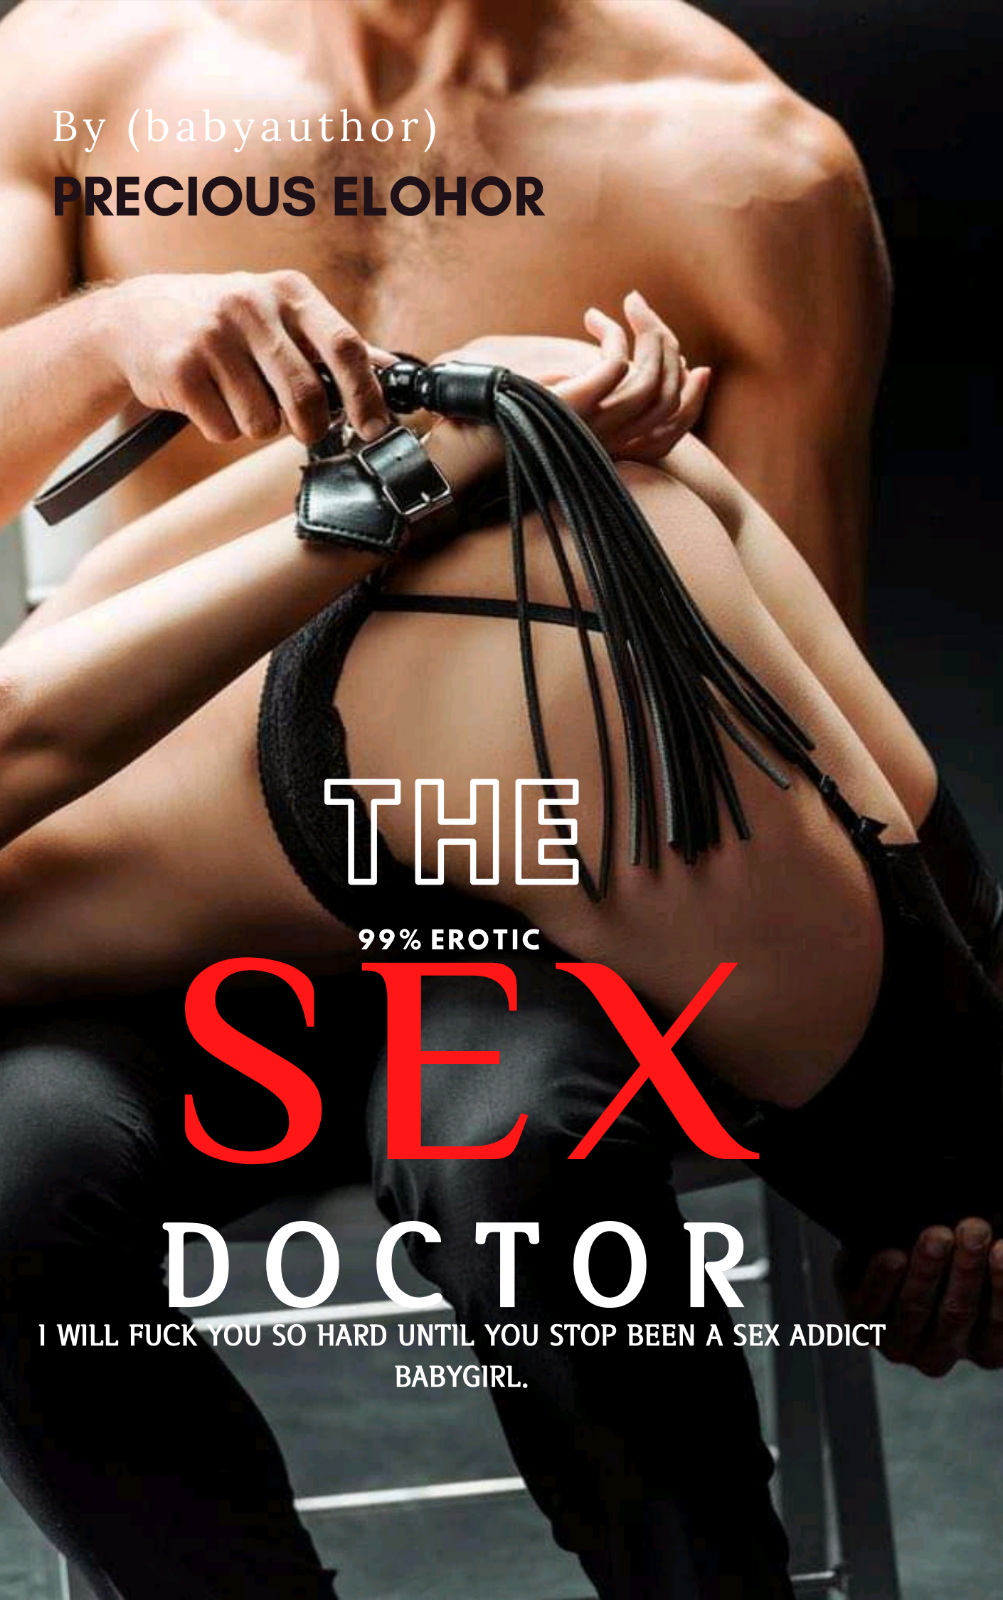 THE SEX DOCTOR HIS SUBMISSIVE (18+) Novel Full Story Book picture photo